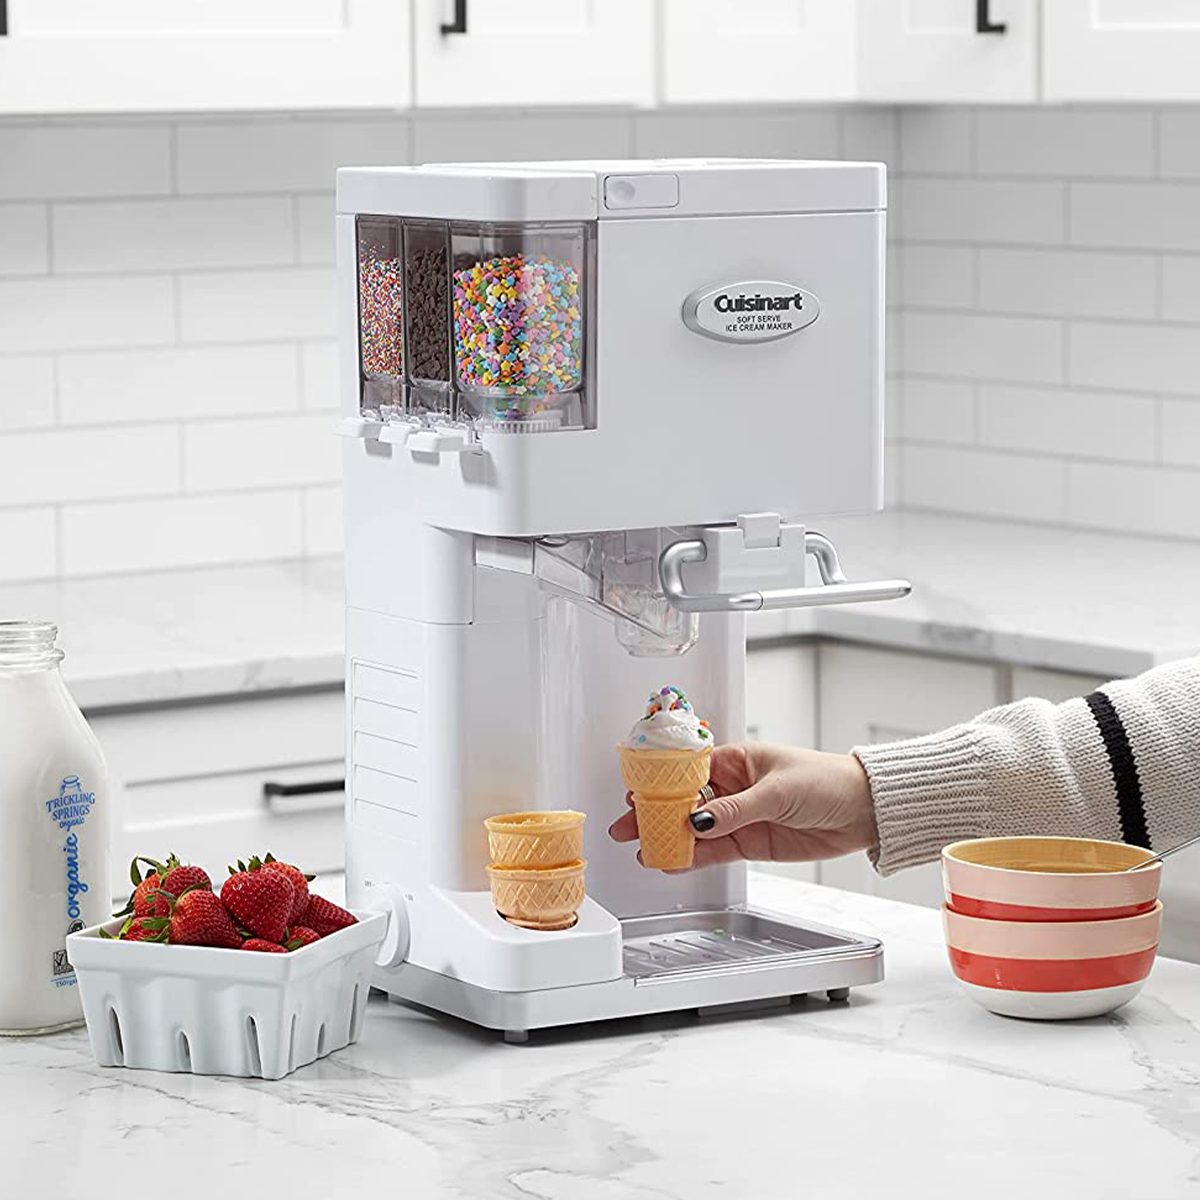 The Cuisinart Soft Serve Ice Cream Maker Is 46% Off at